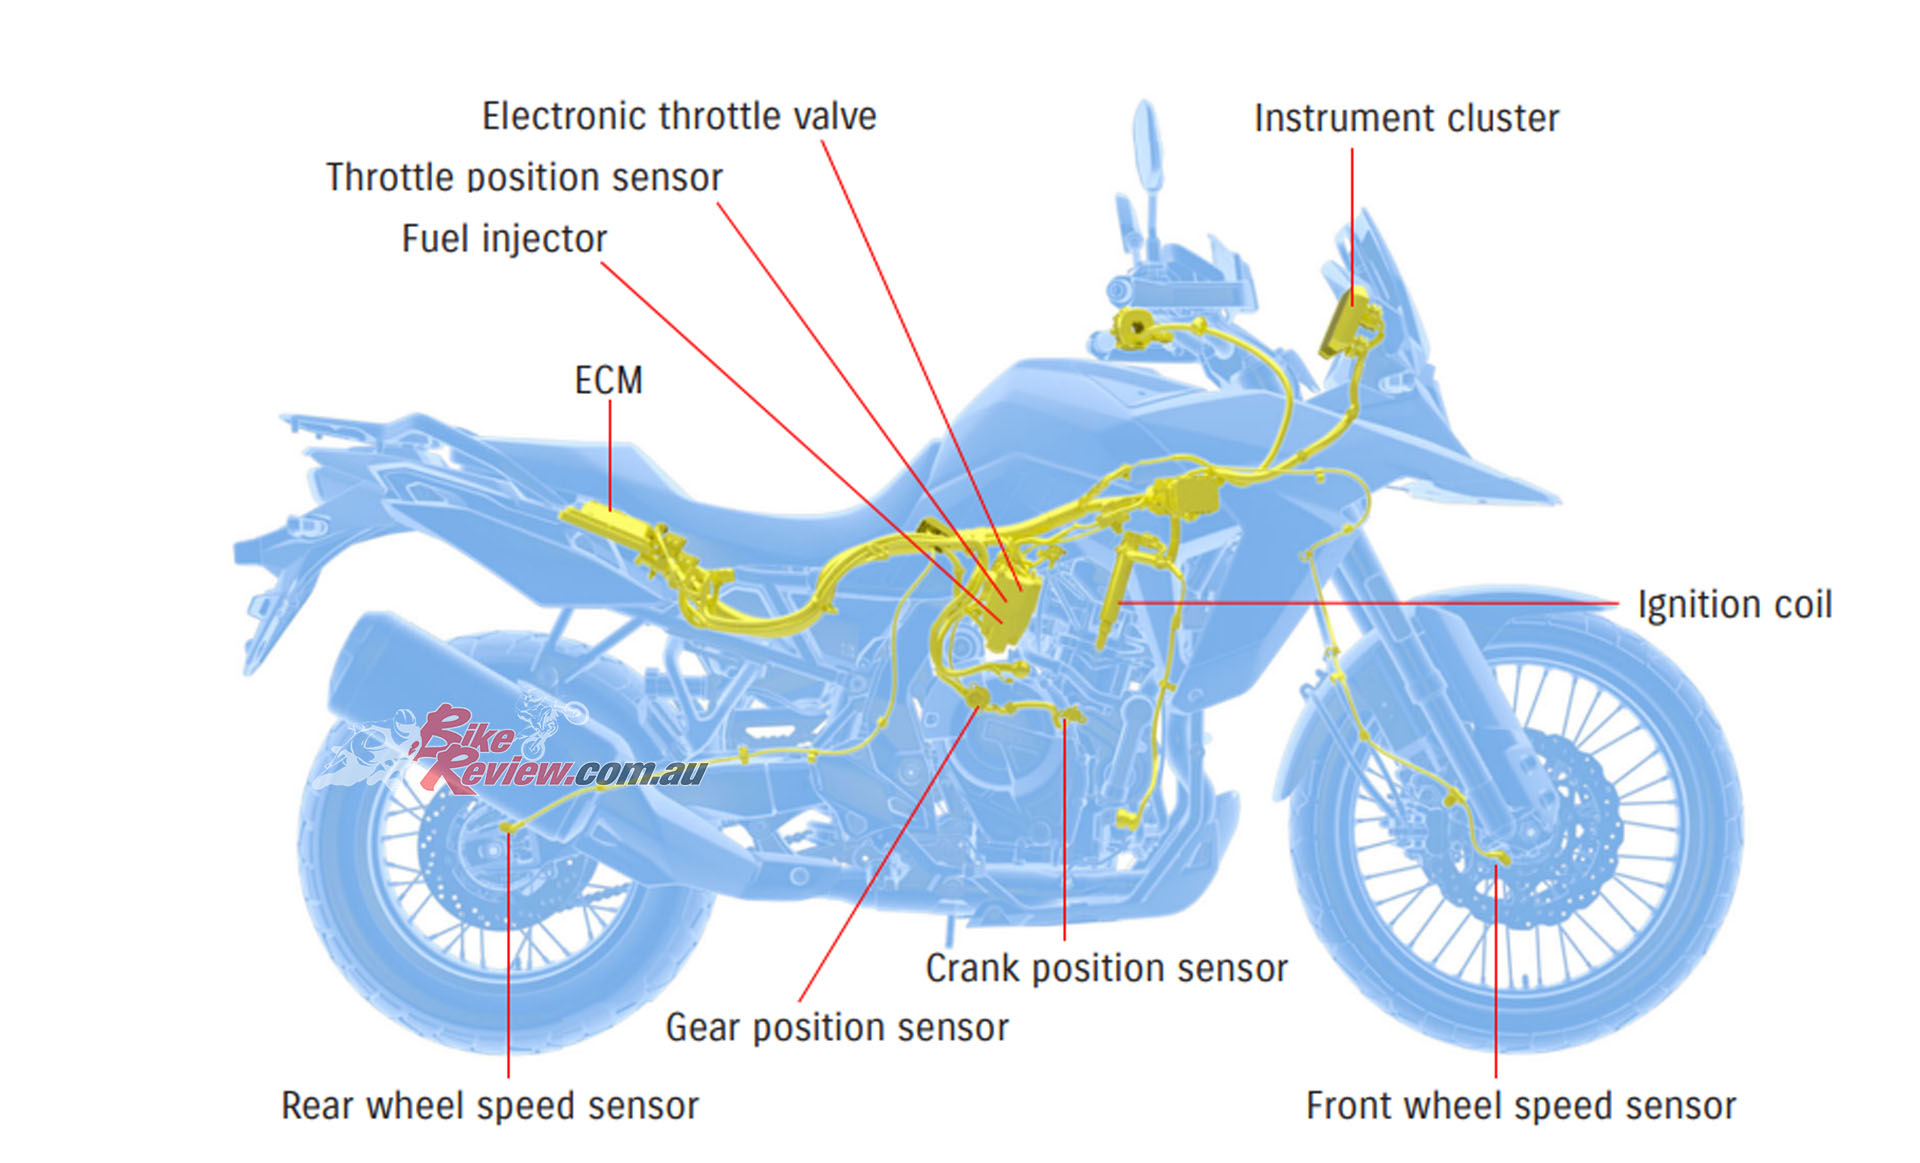 The Suzuki Intelligent Ride System (S.I.R.S.) features a collection of advanced electronic rider assist systems.